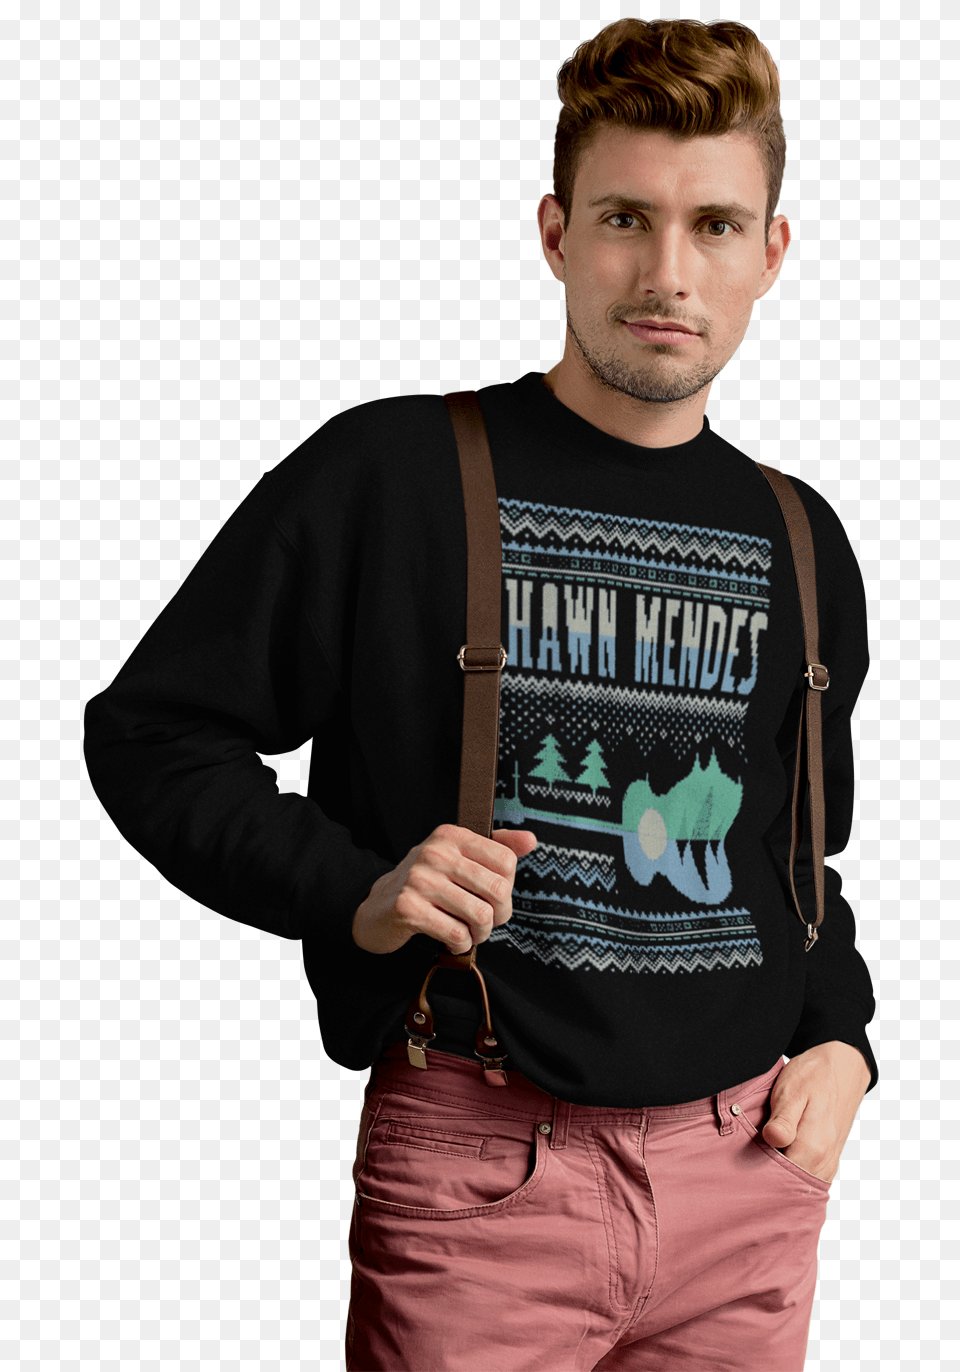 Transparent Hipster Guy Elephant, Accessories, Sleeve, Long Sleeve, T-shirt Png